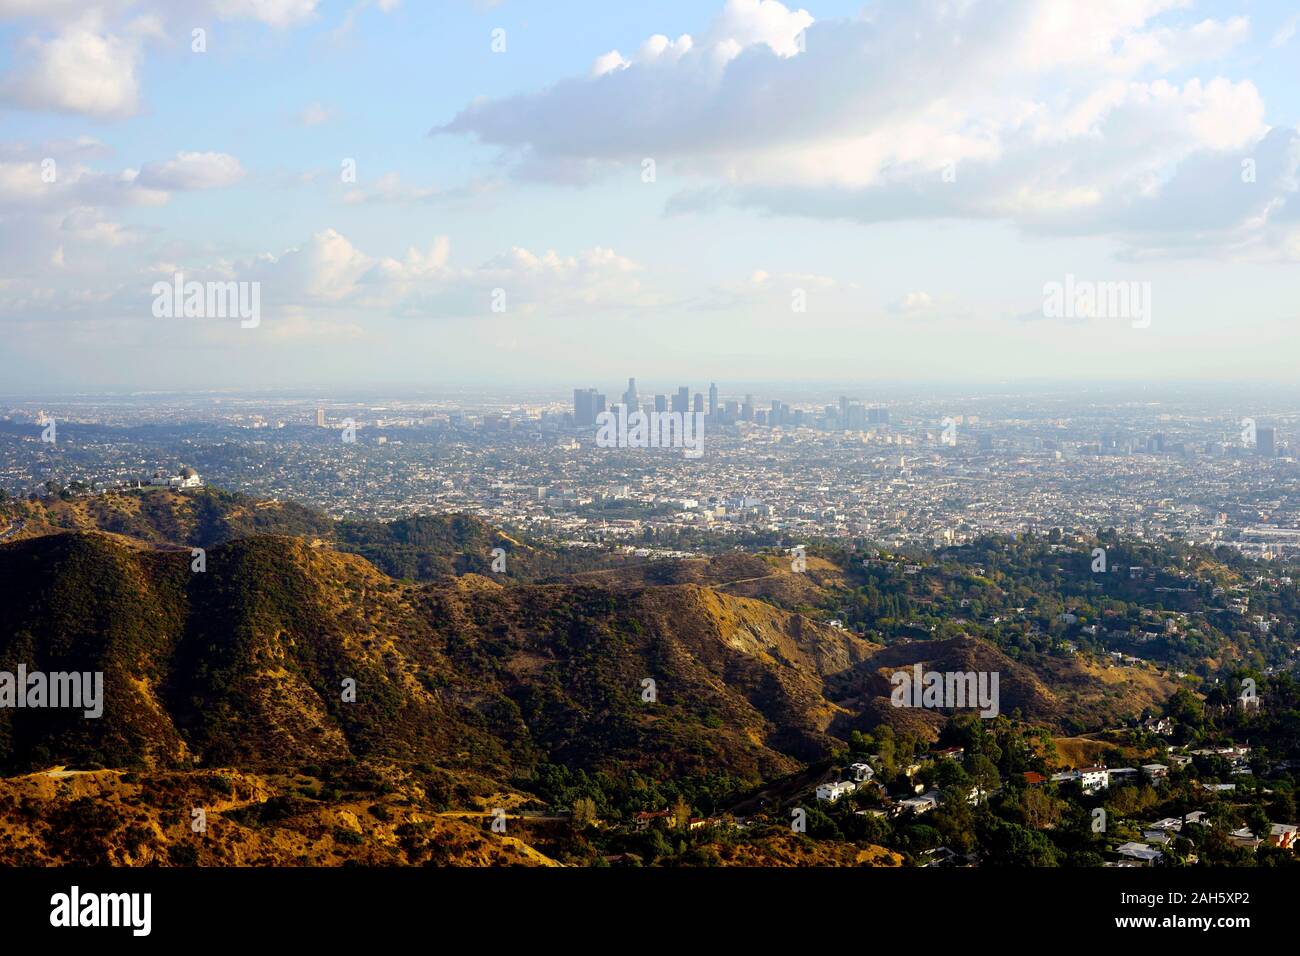 Griffith Observatory and the city of Los Angeles California as seen from Hollywood Hills of the Santa Monica Mountains Stock Photo